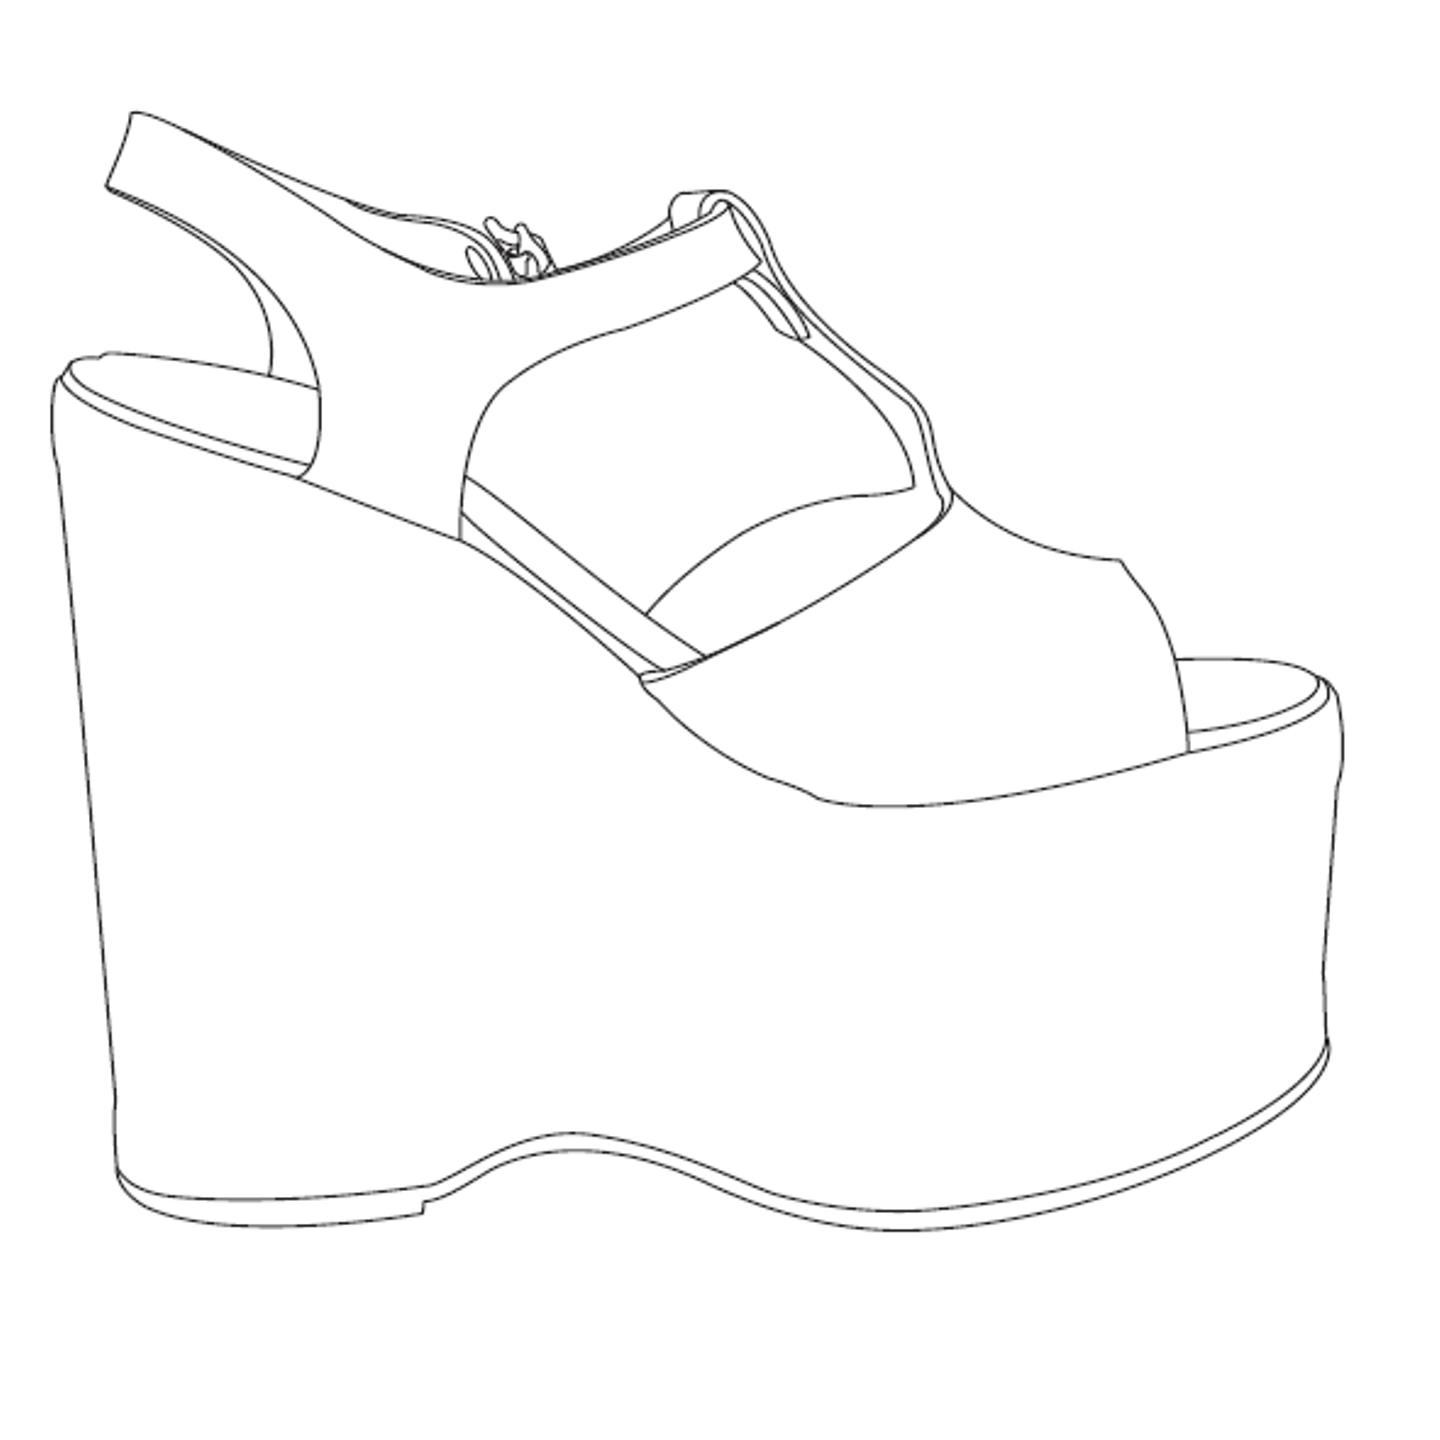 Free Shoe Outline Template, Download Free Clip Art, Free Clip Art on Clipart Library1440 x 1440